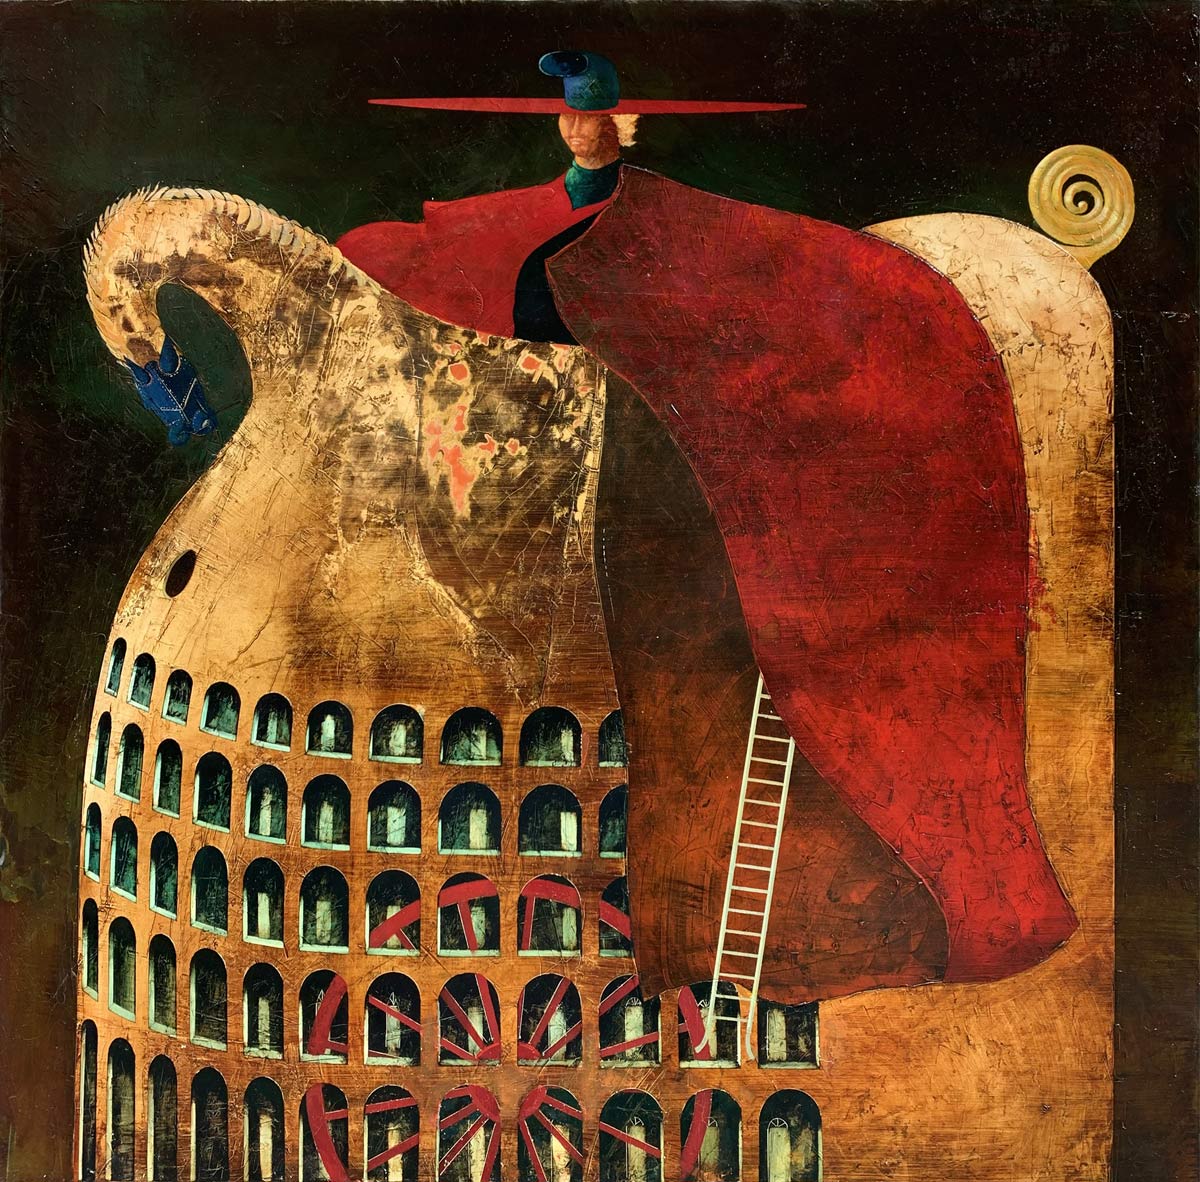 L'ULTIMO CAVALIERE by the artist Angelo Palazzini